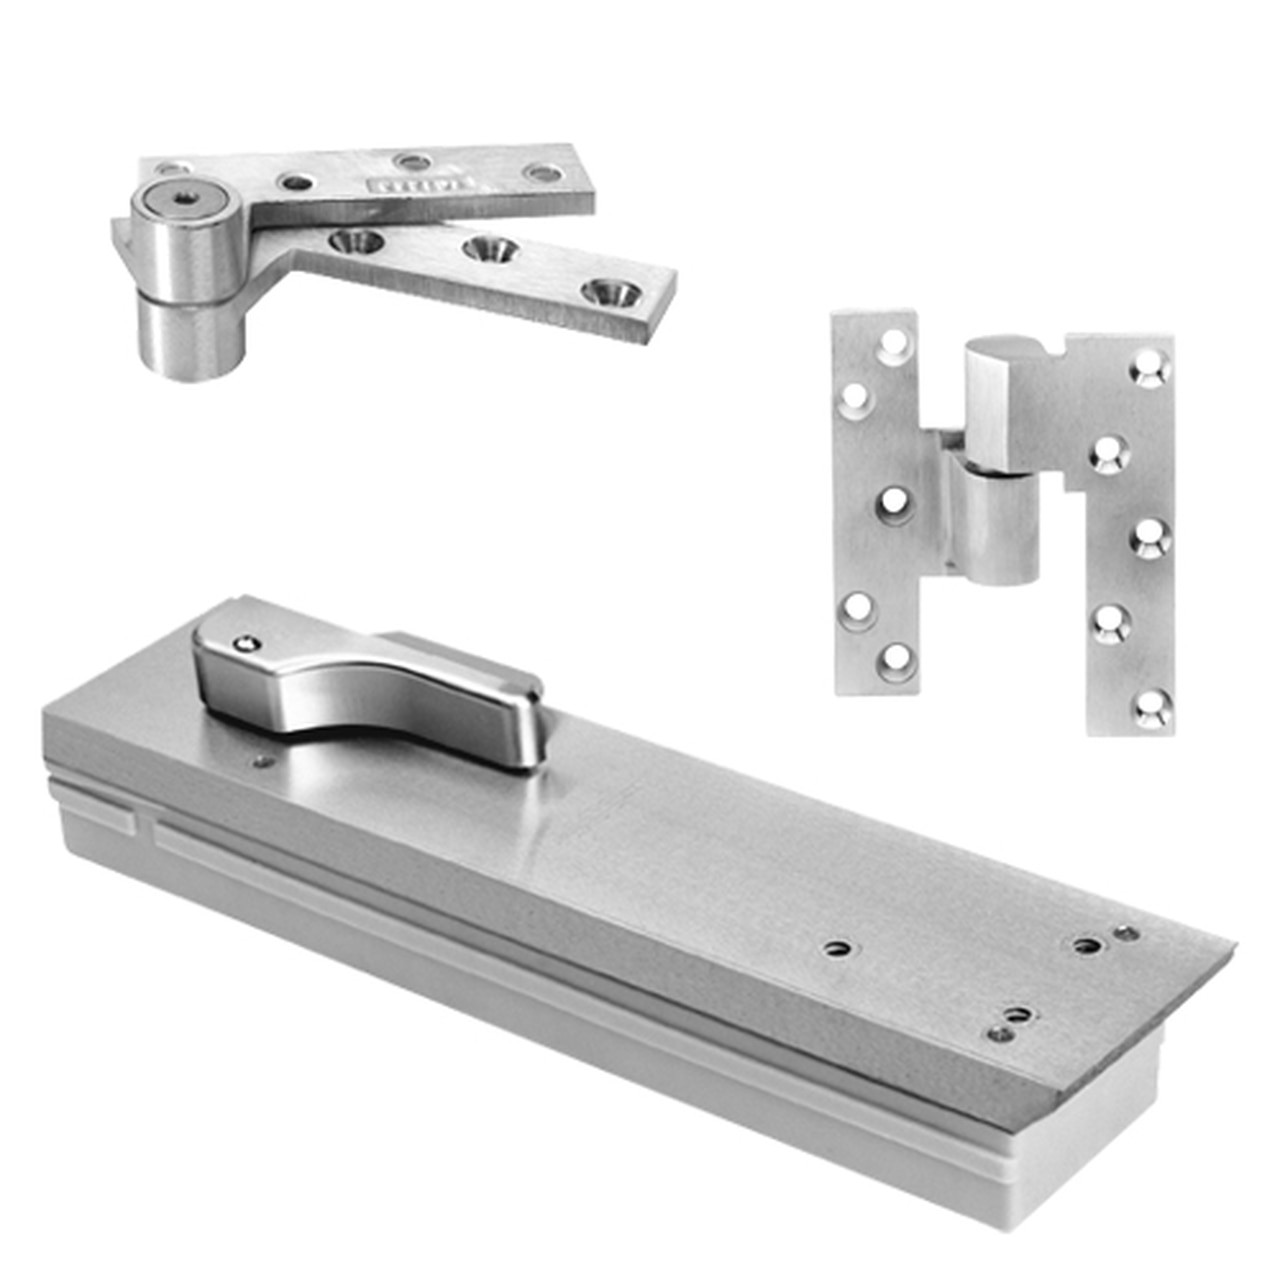 FQ5104NBC-LCC-LH-625 Rixson Q51 Series Fire Rated 3/4" Offset Hung Shallow Depth Floor Closers in Bright Chrome Finish